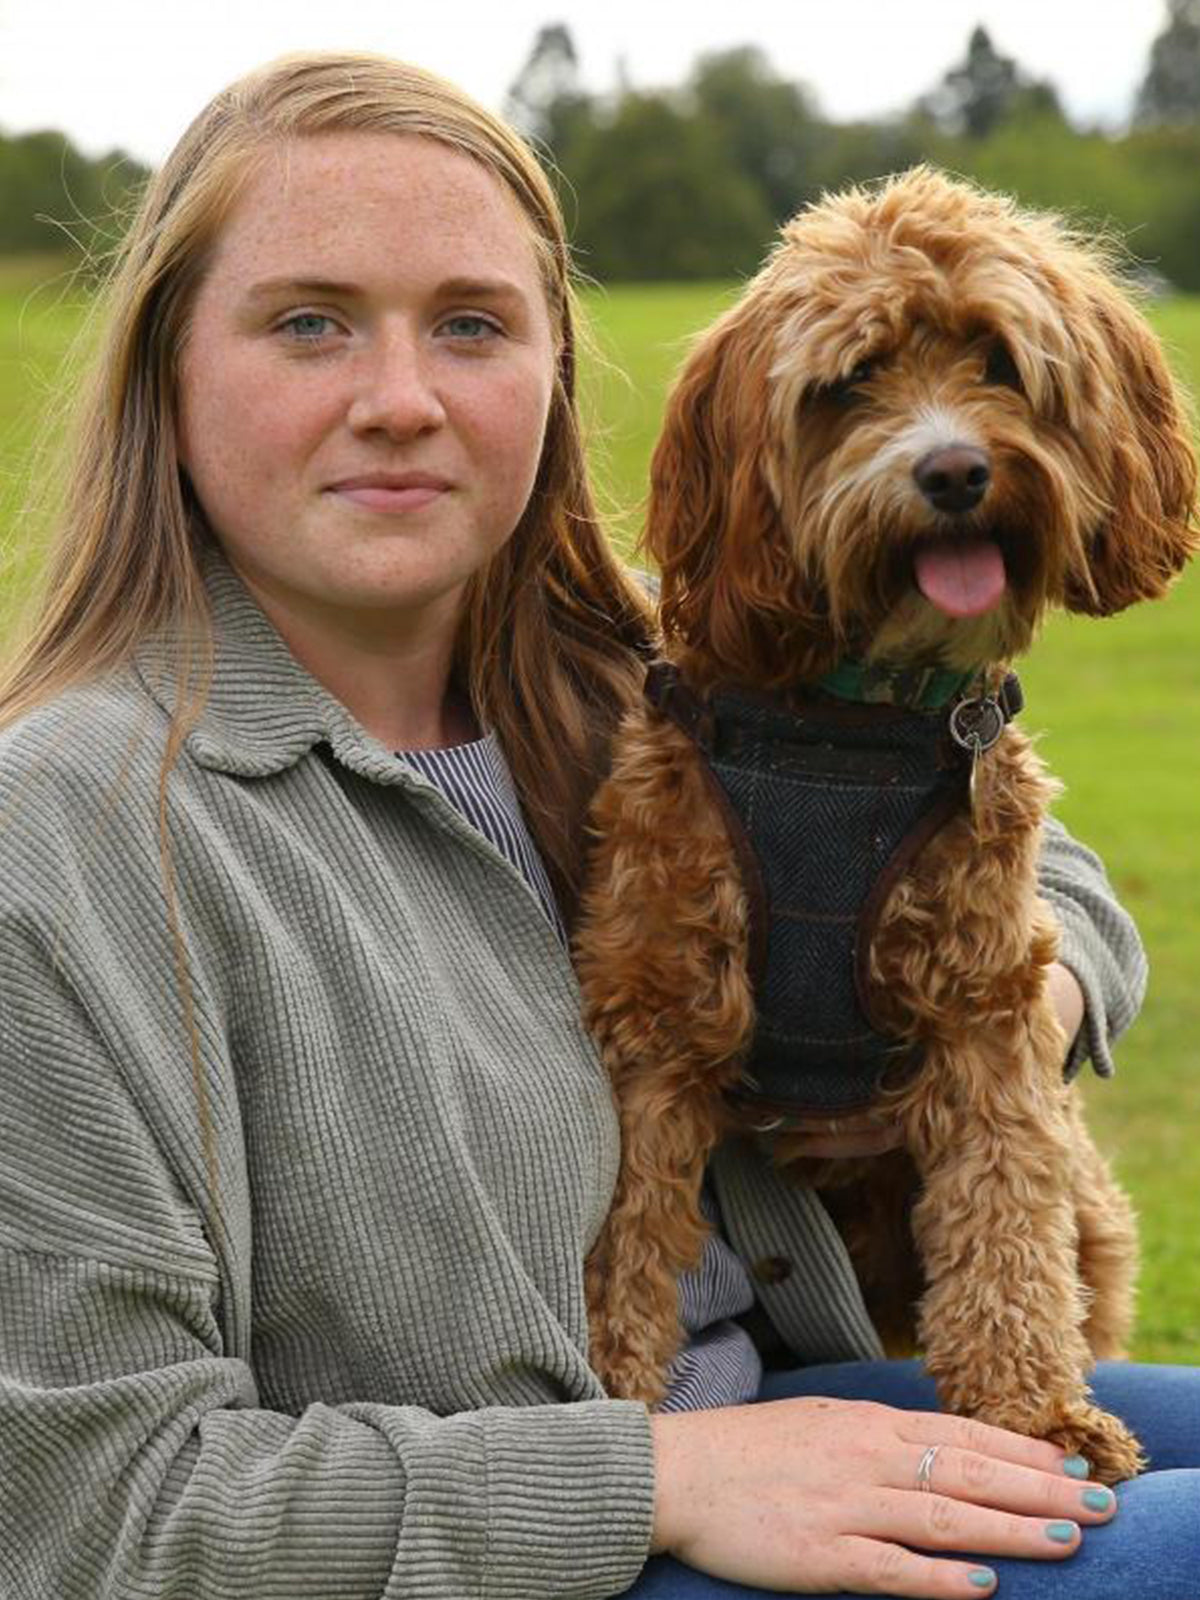 Project Harmless Brand Ambassador Laura Young and Her Dog